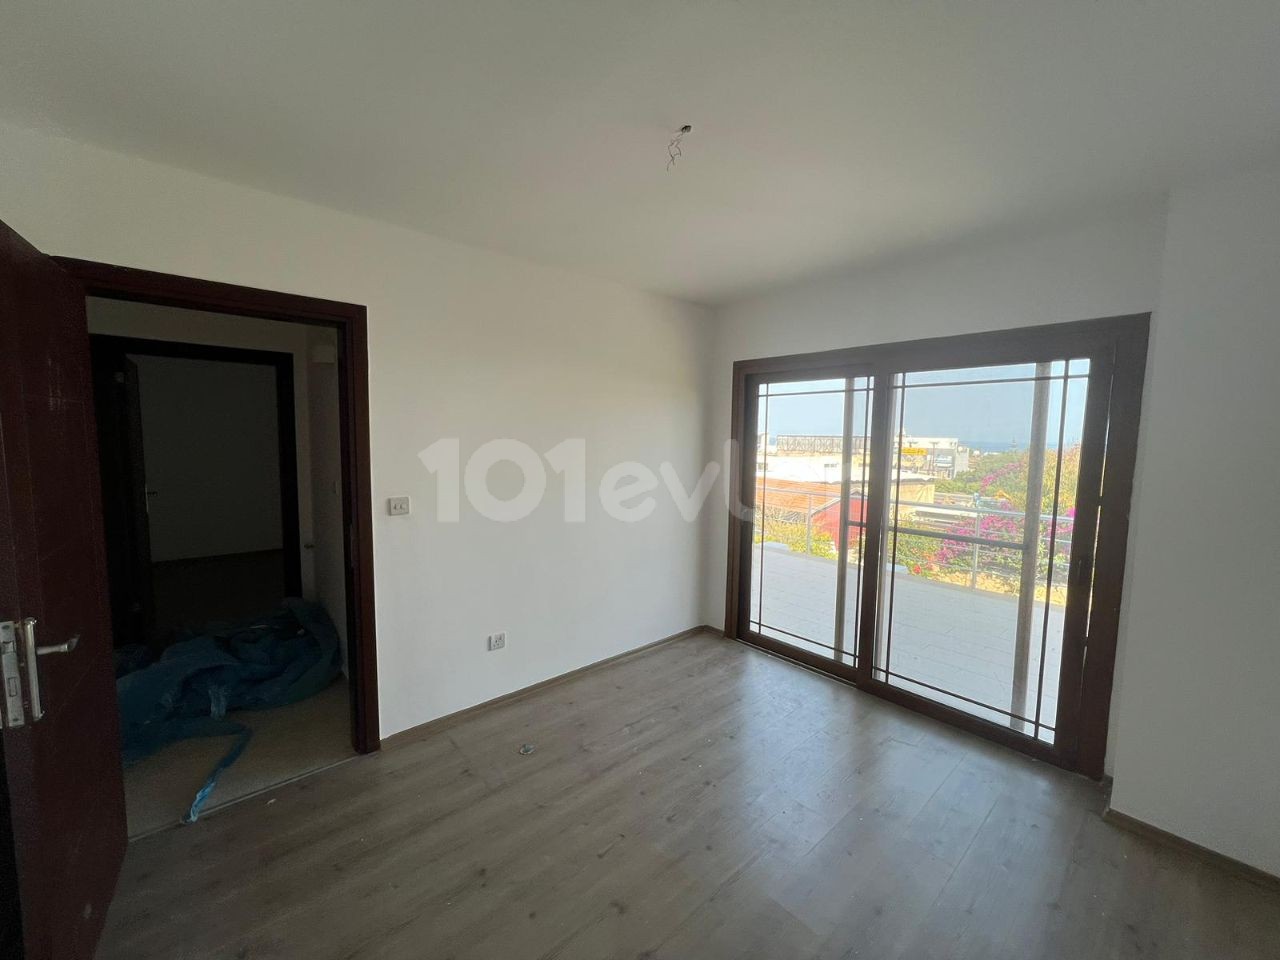 MOUNTAIN AND SEA VIEW VILLA FOR SALE IN ÇATALKÖY!